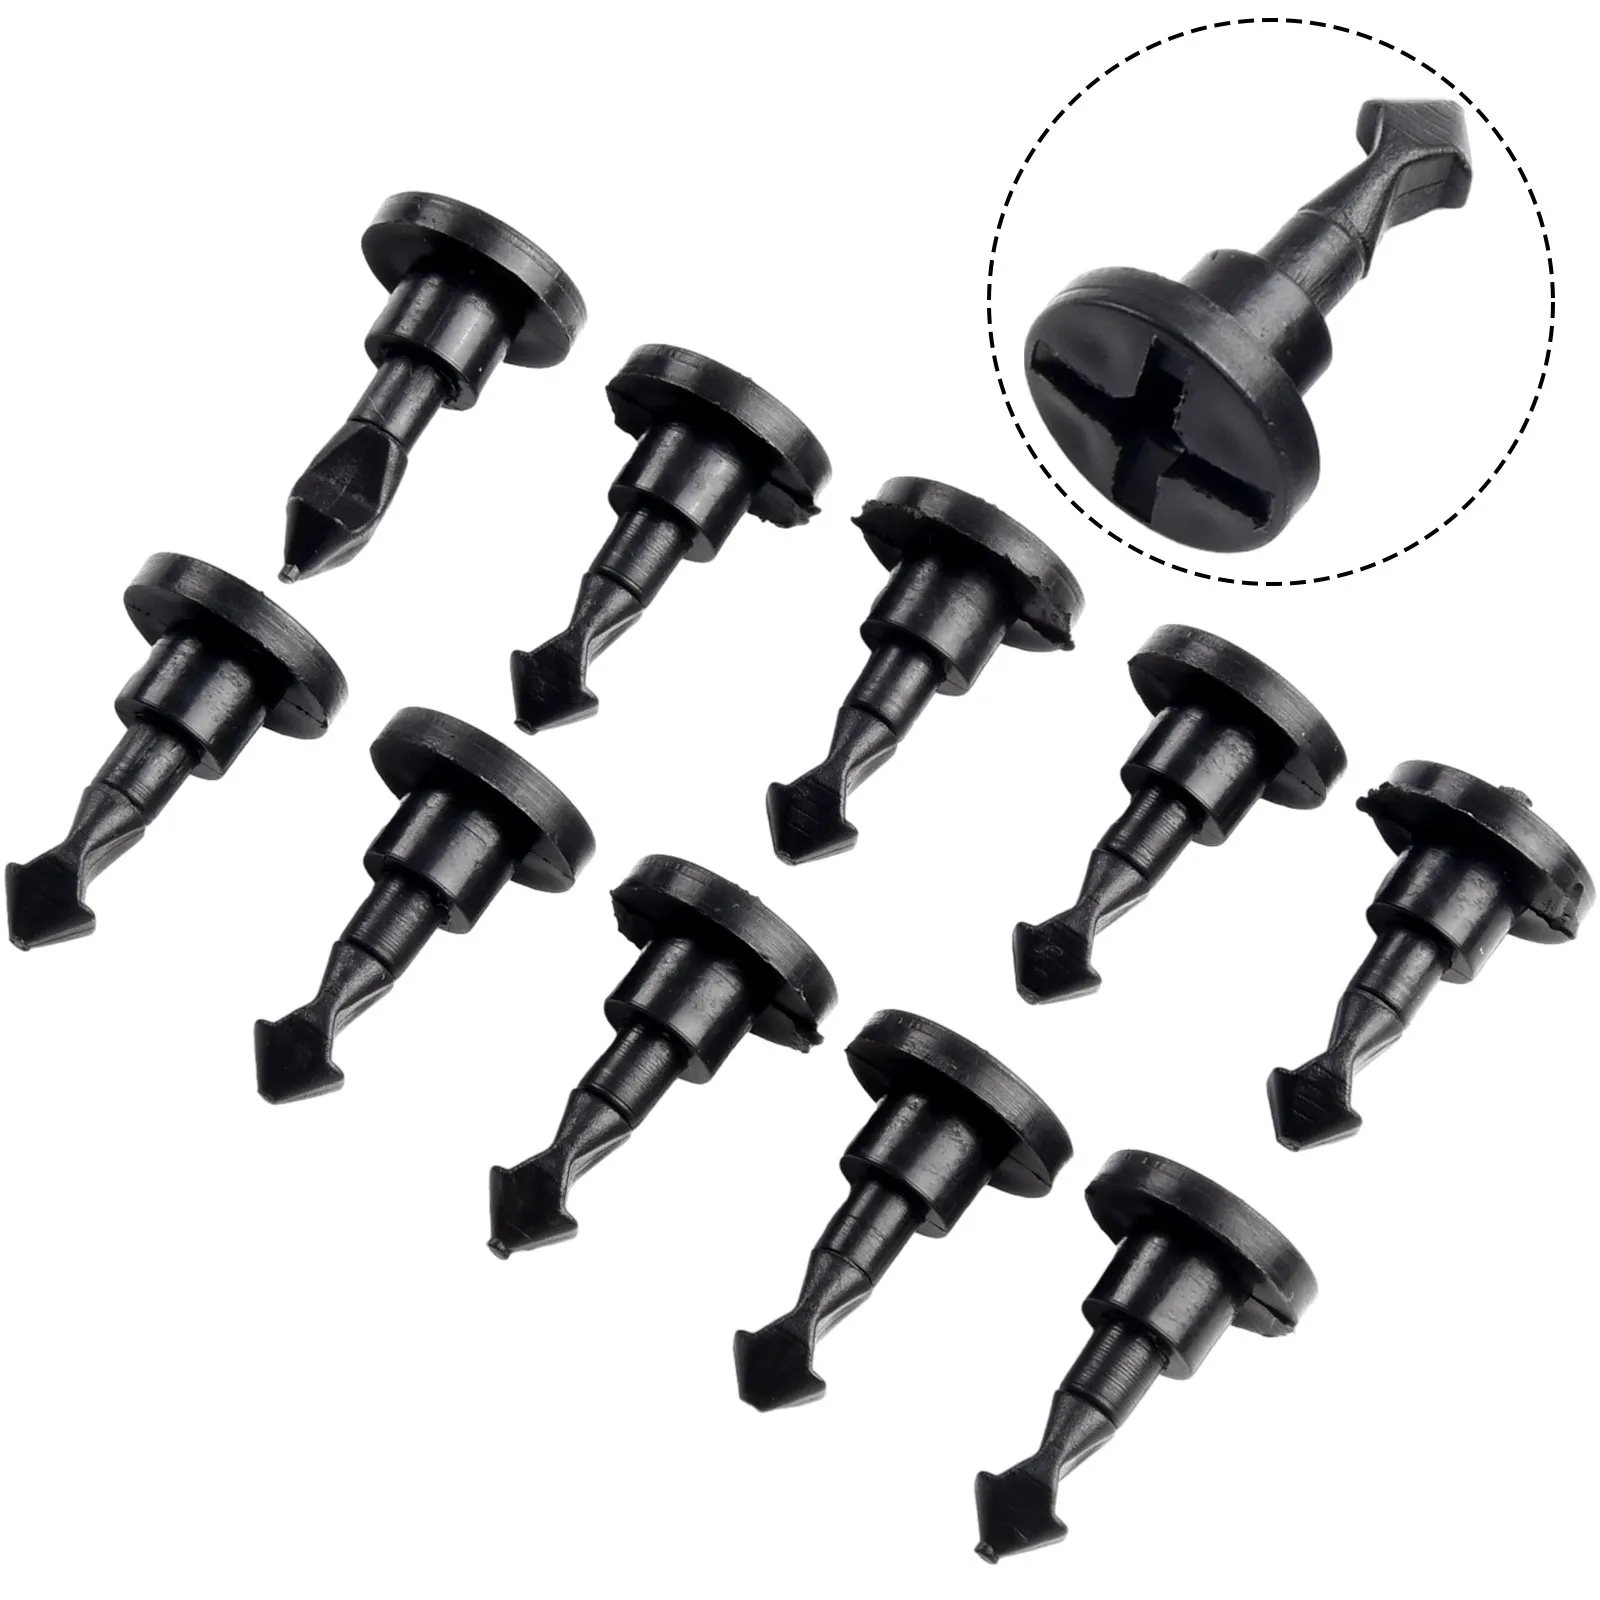 10Pcs Car Engine Compartment Cover Plate Screw Clips For  2003-2010 955 572 710 00, 95557271000,955-572-710-00